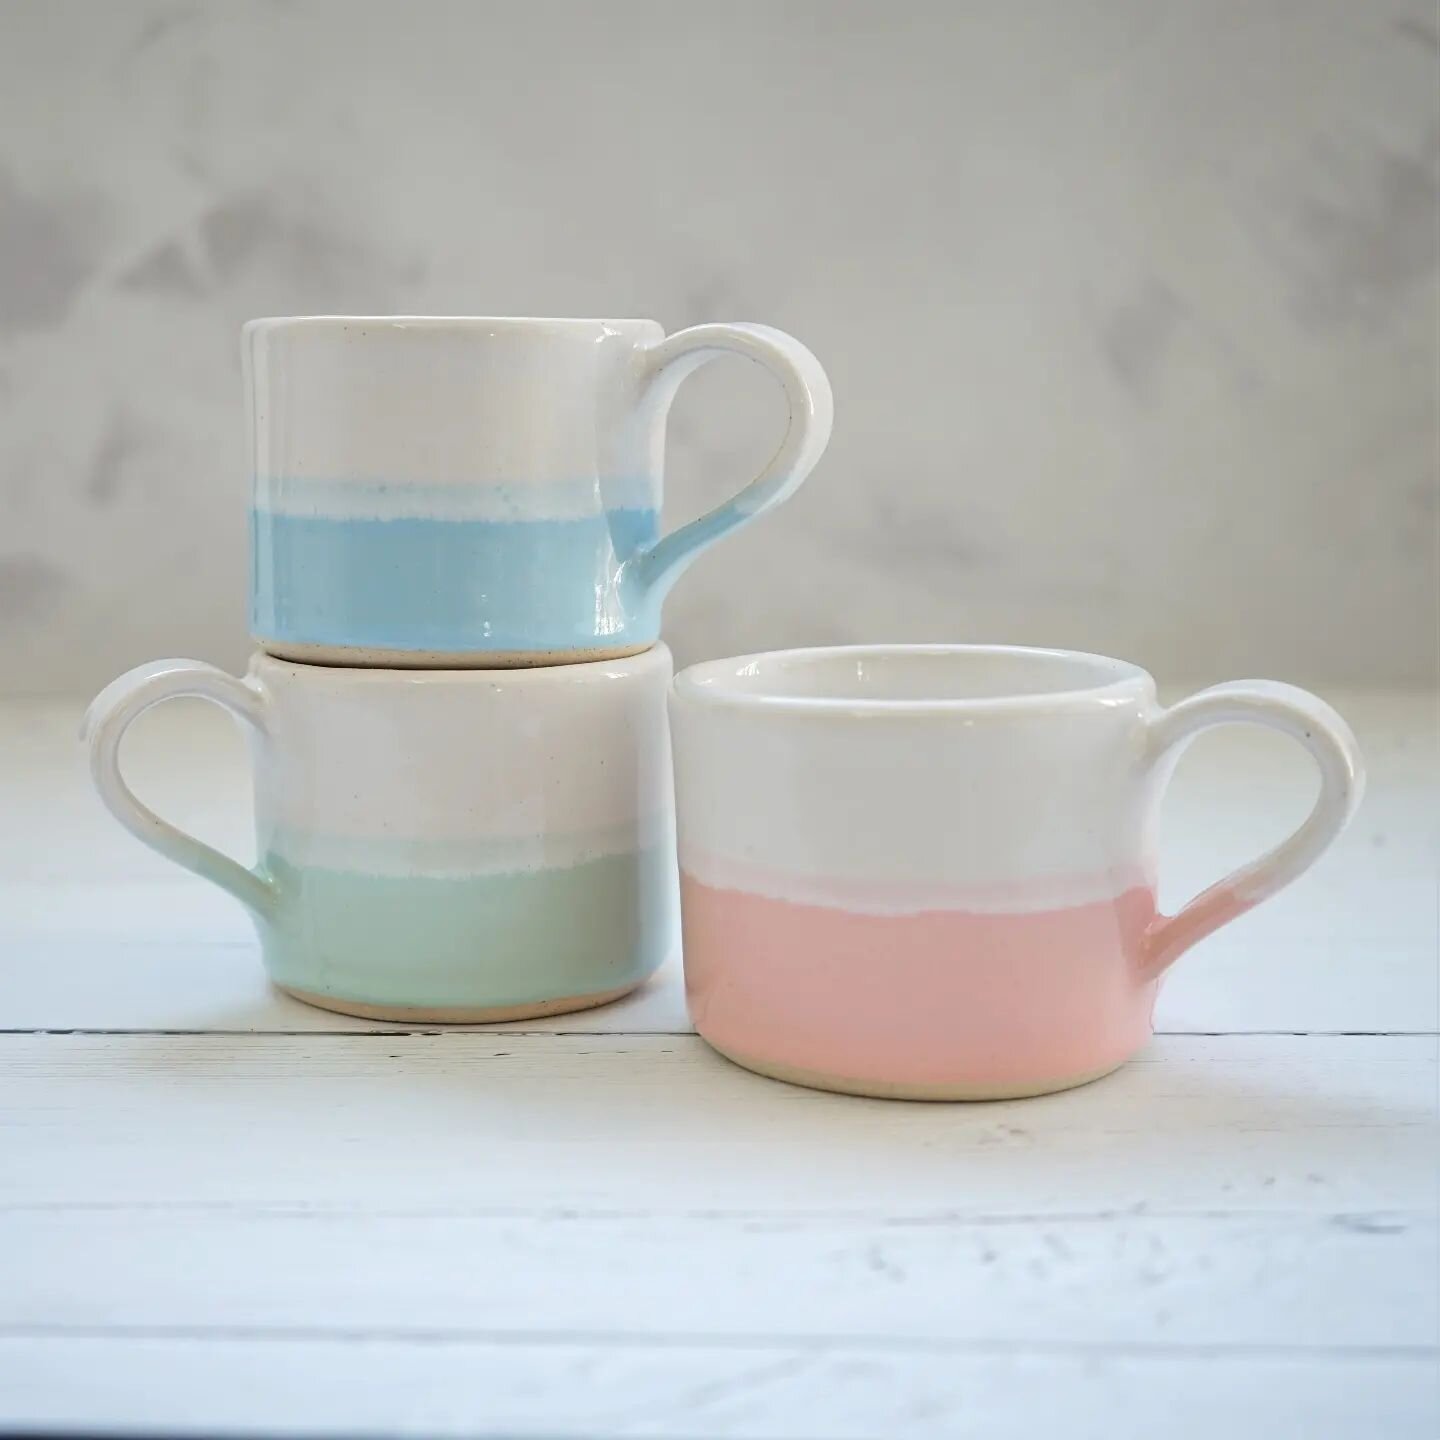 A batch of these pretty pastel mugs is now in the shop, with more to come next week hopefully... 😁